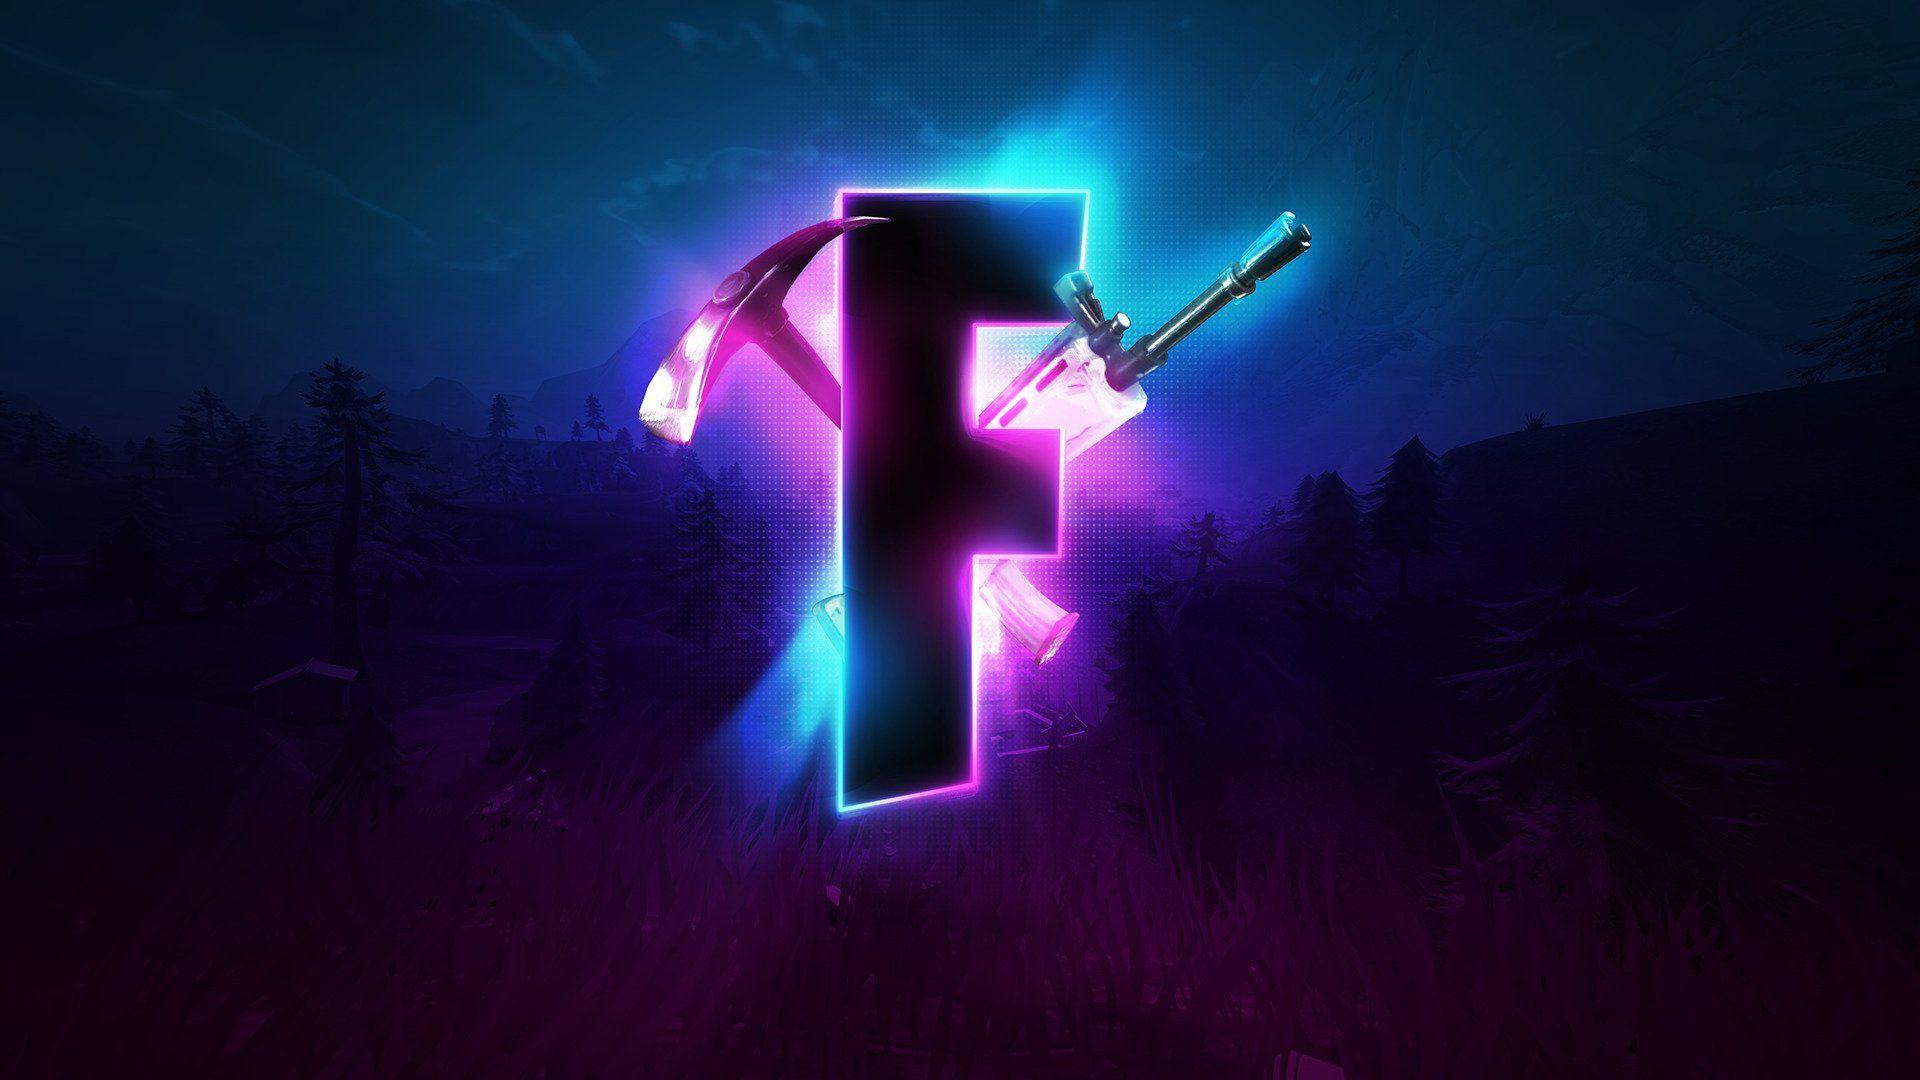 F stands for Fortnite by Noah Stephenson Wallpapers and Free Stock Photos.